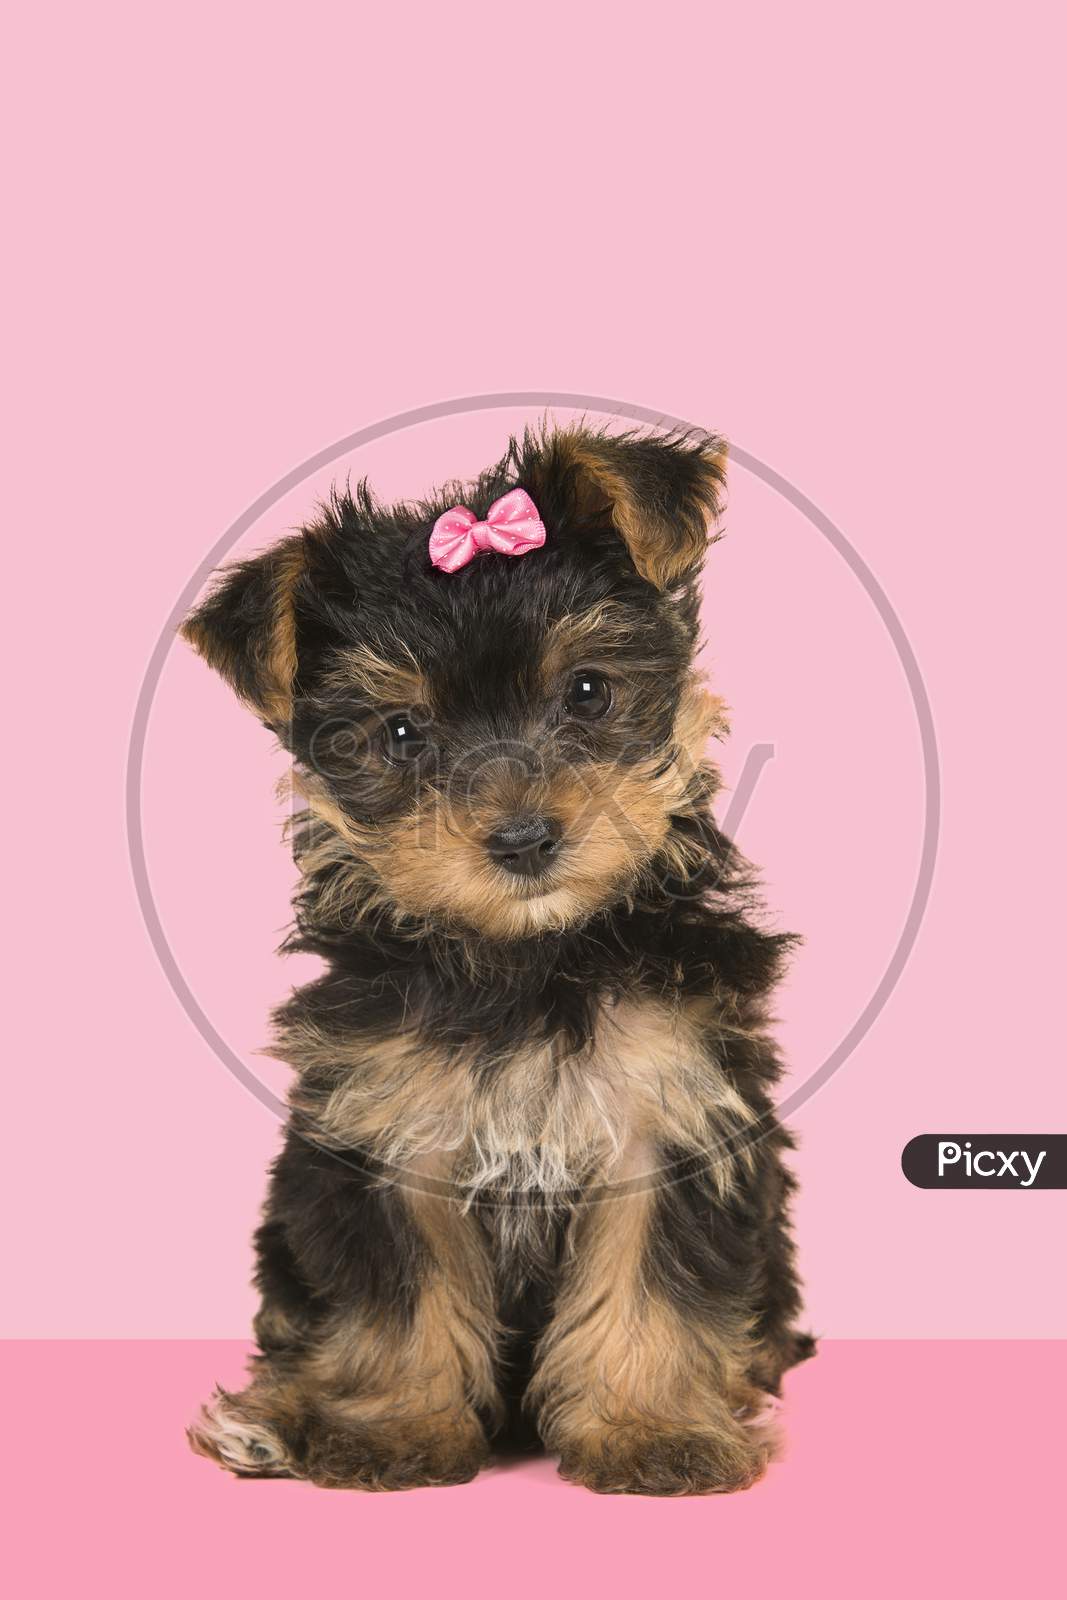 Cute Sitting Yorkshire Terrier, Yorkie Puppy Wearing A Pink Bow Looking At The Camera On A Pink Background